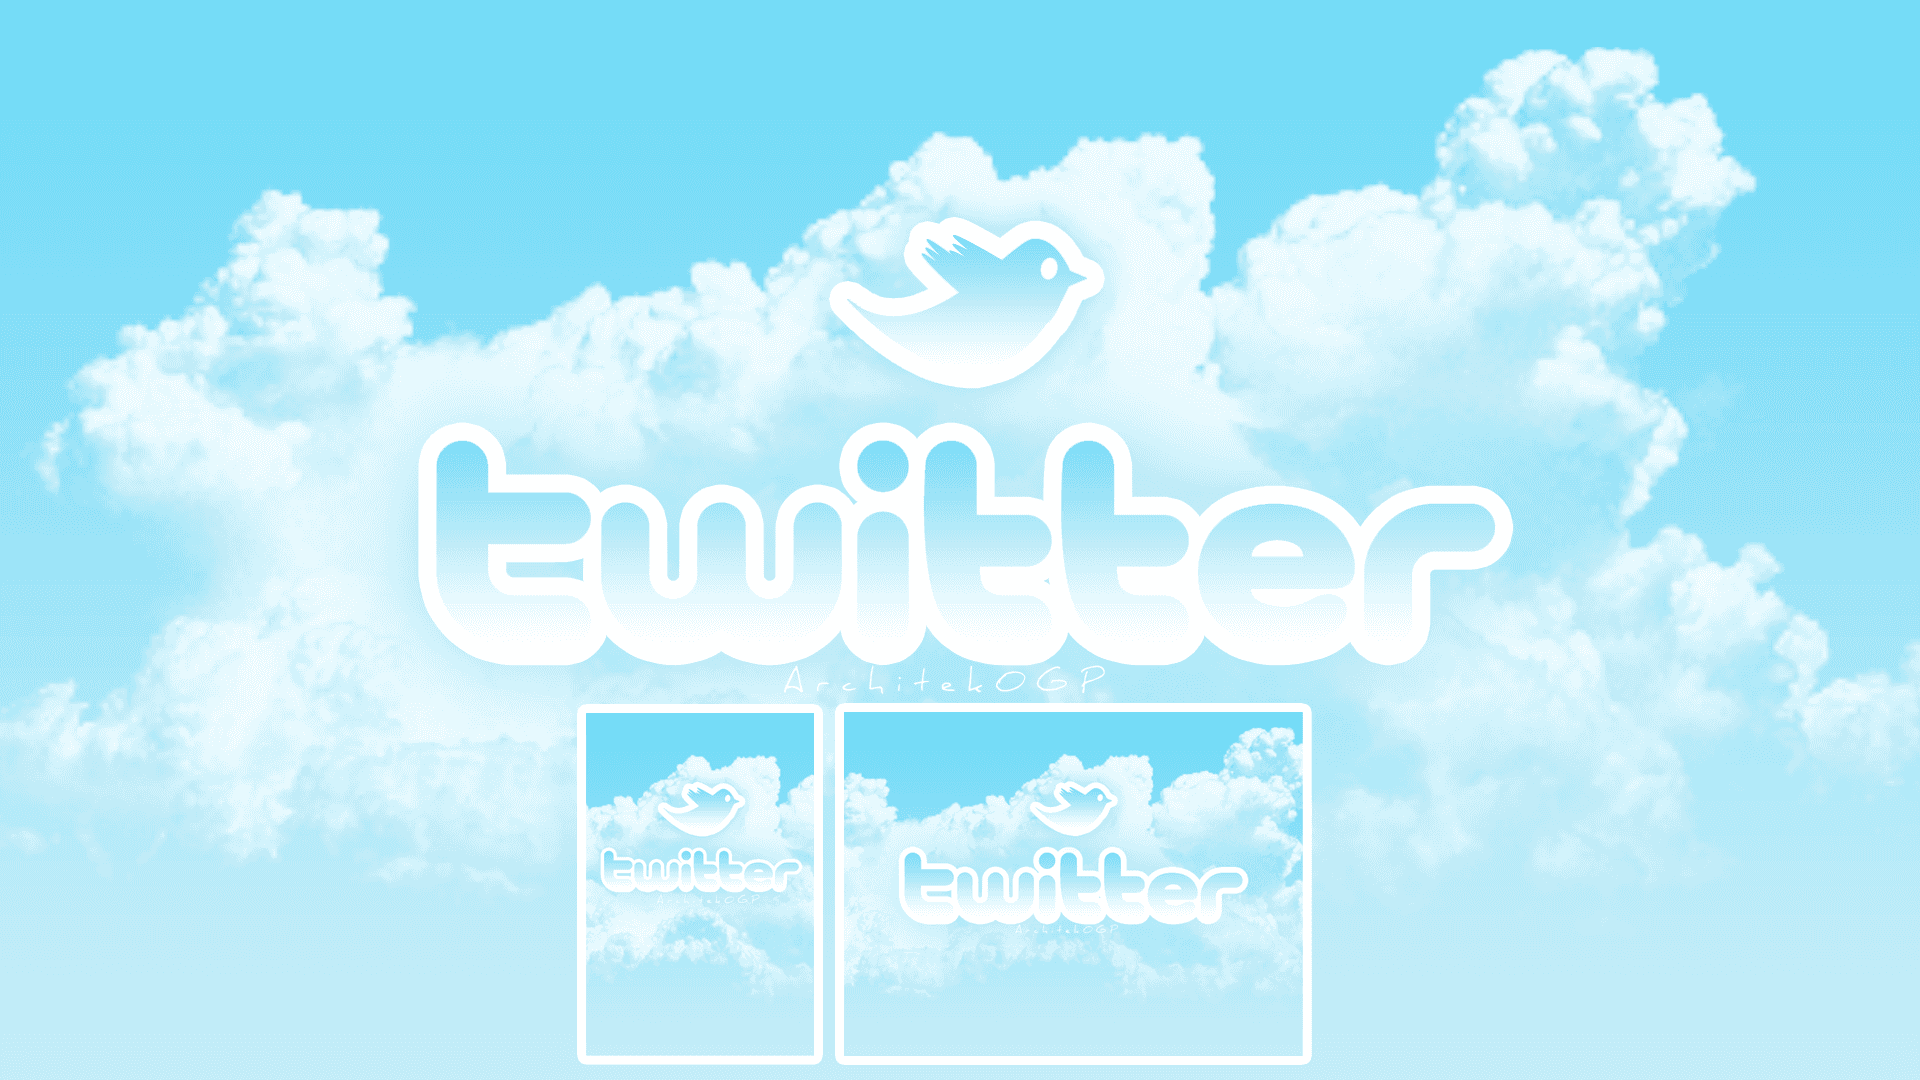 Show your brand’s personality with a unique Twitter background